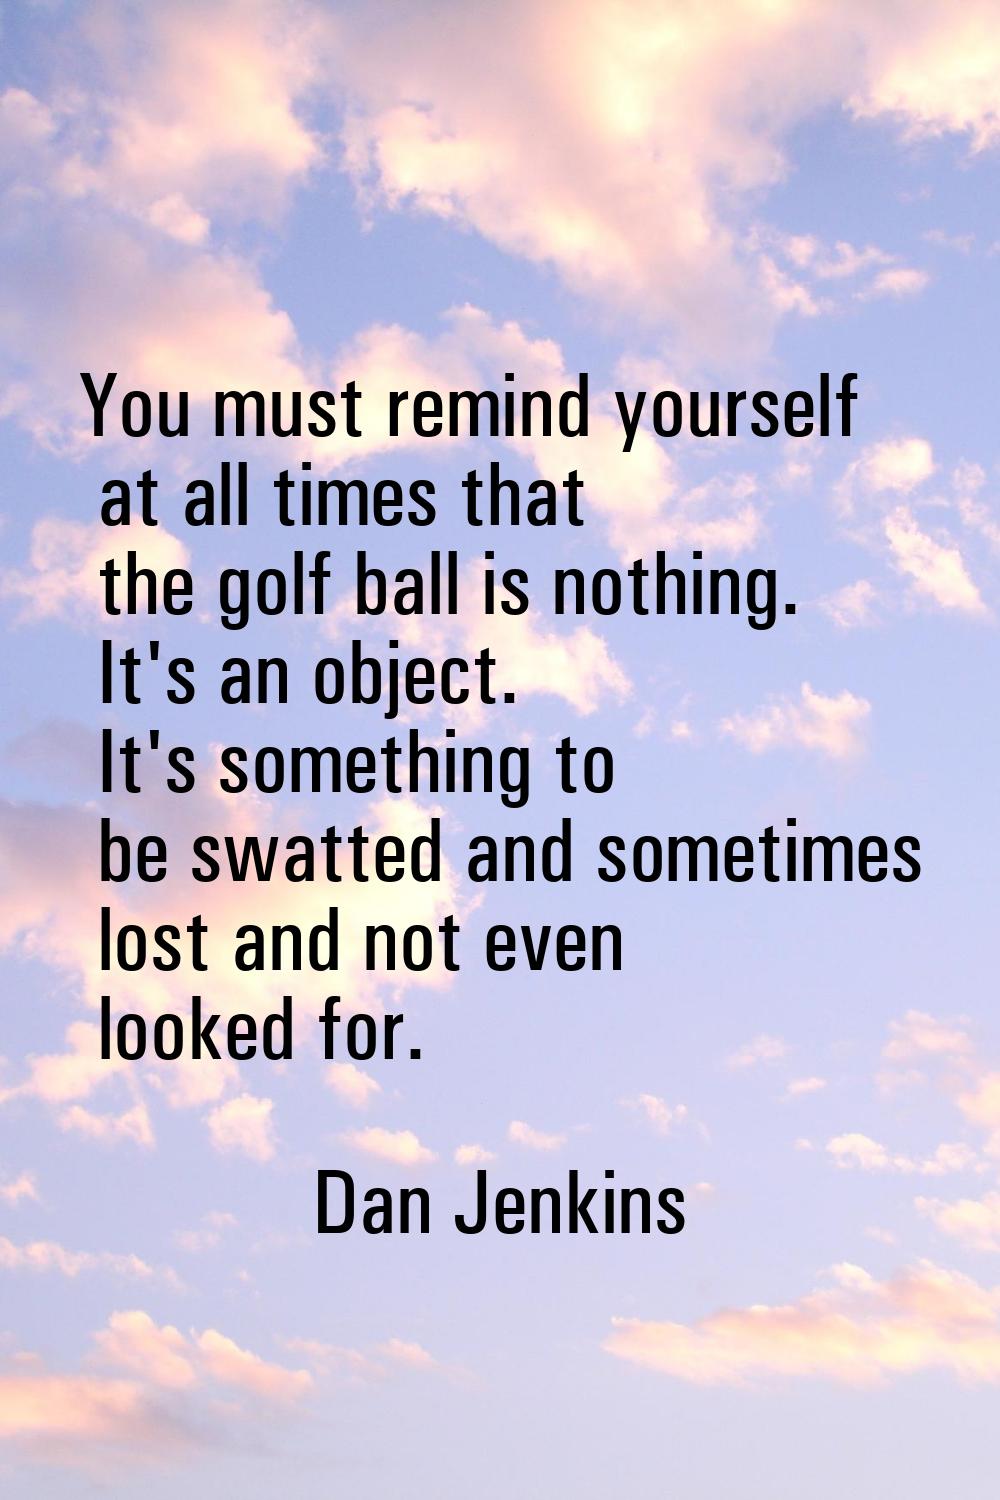 You must remind yourself at all times that the golf ball is nothing. It's an object. It's something